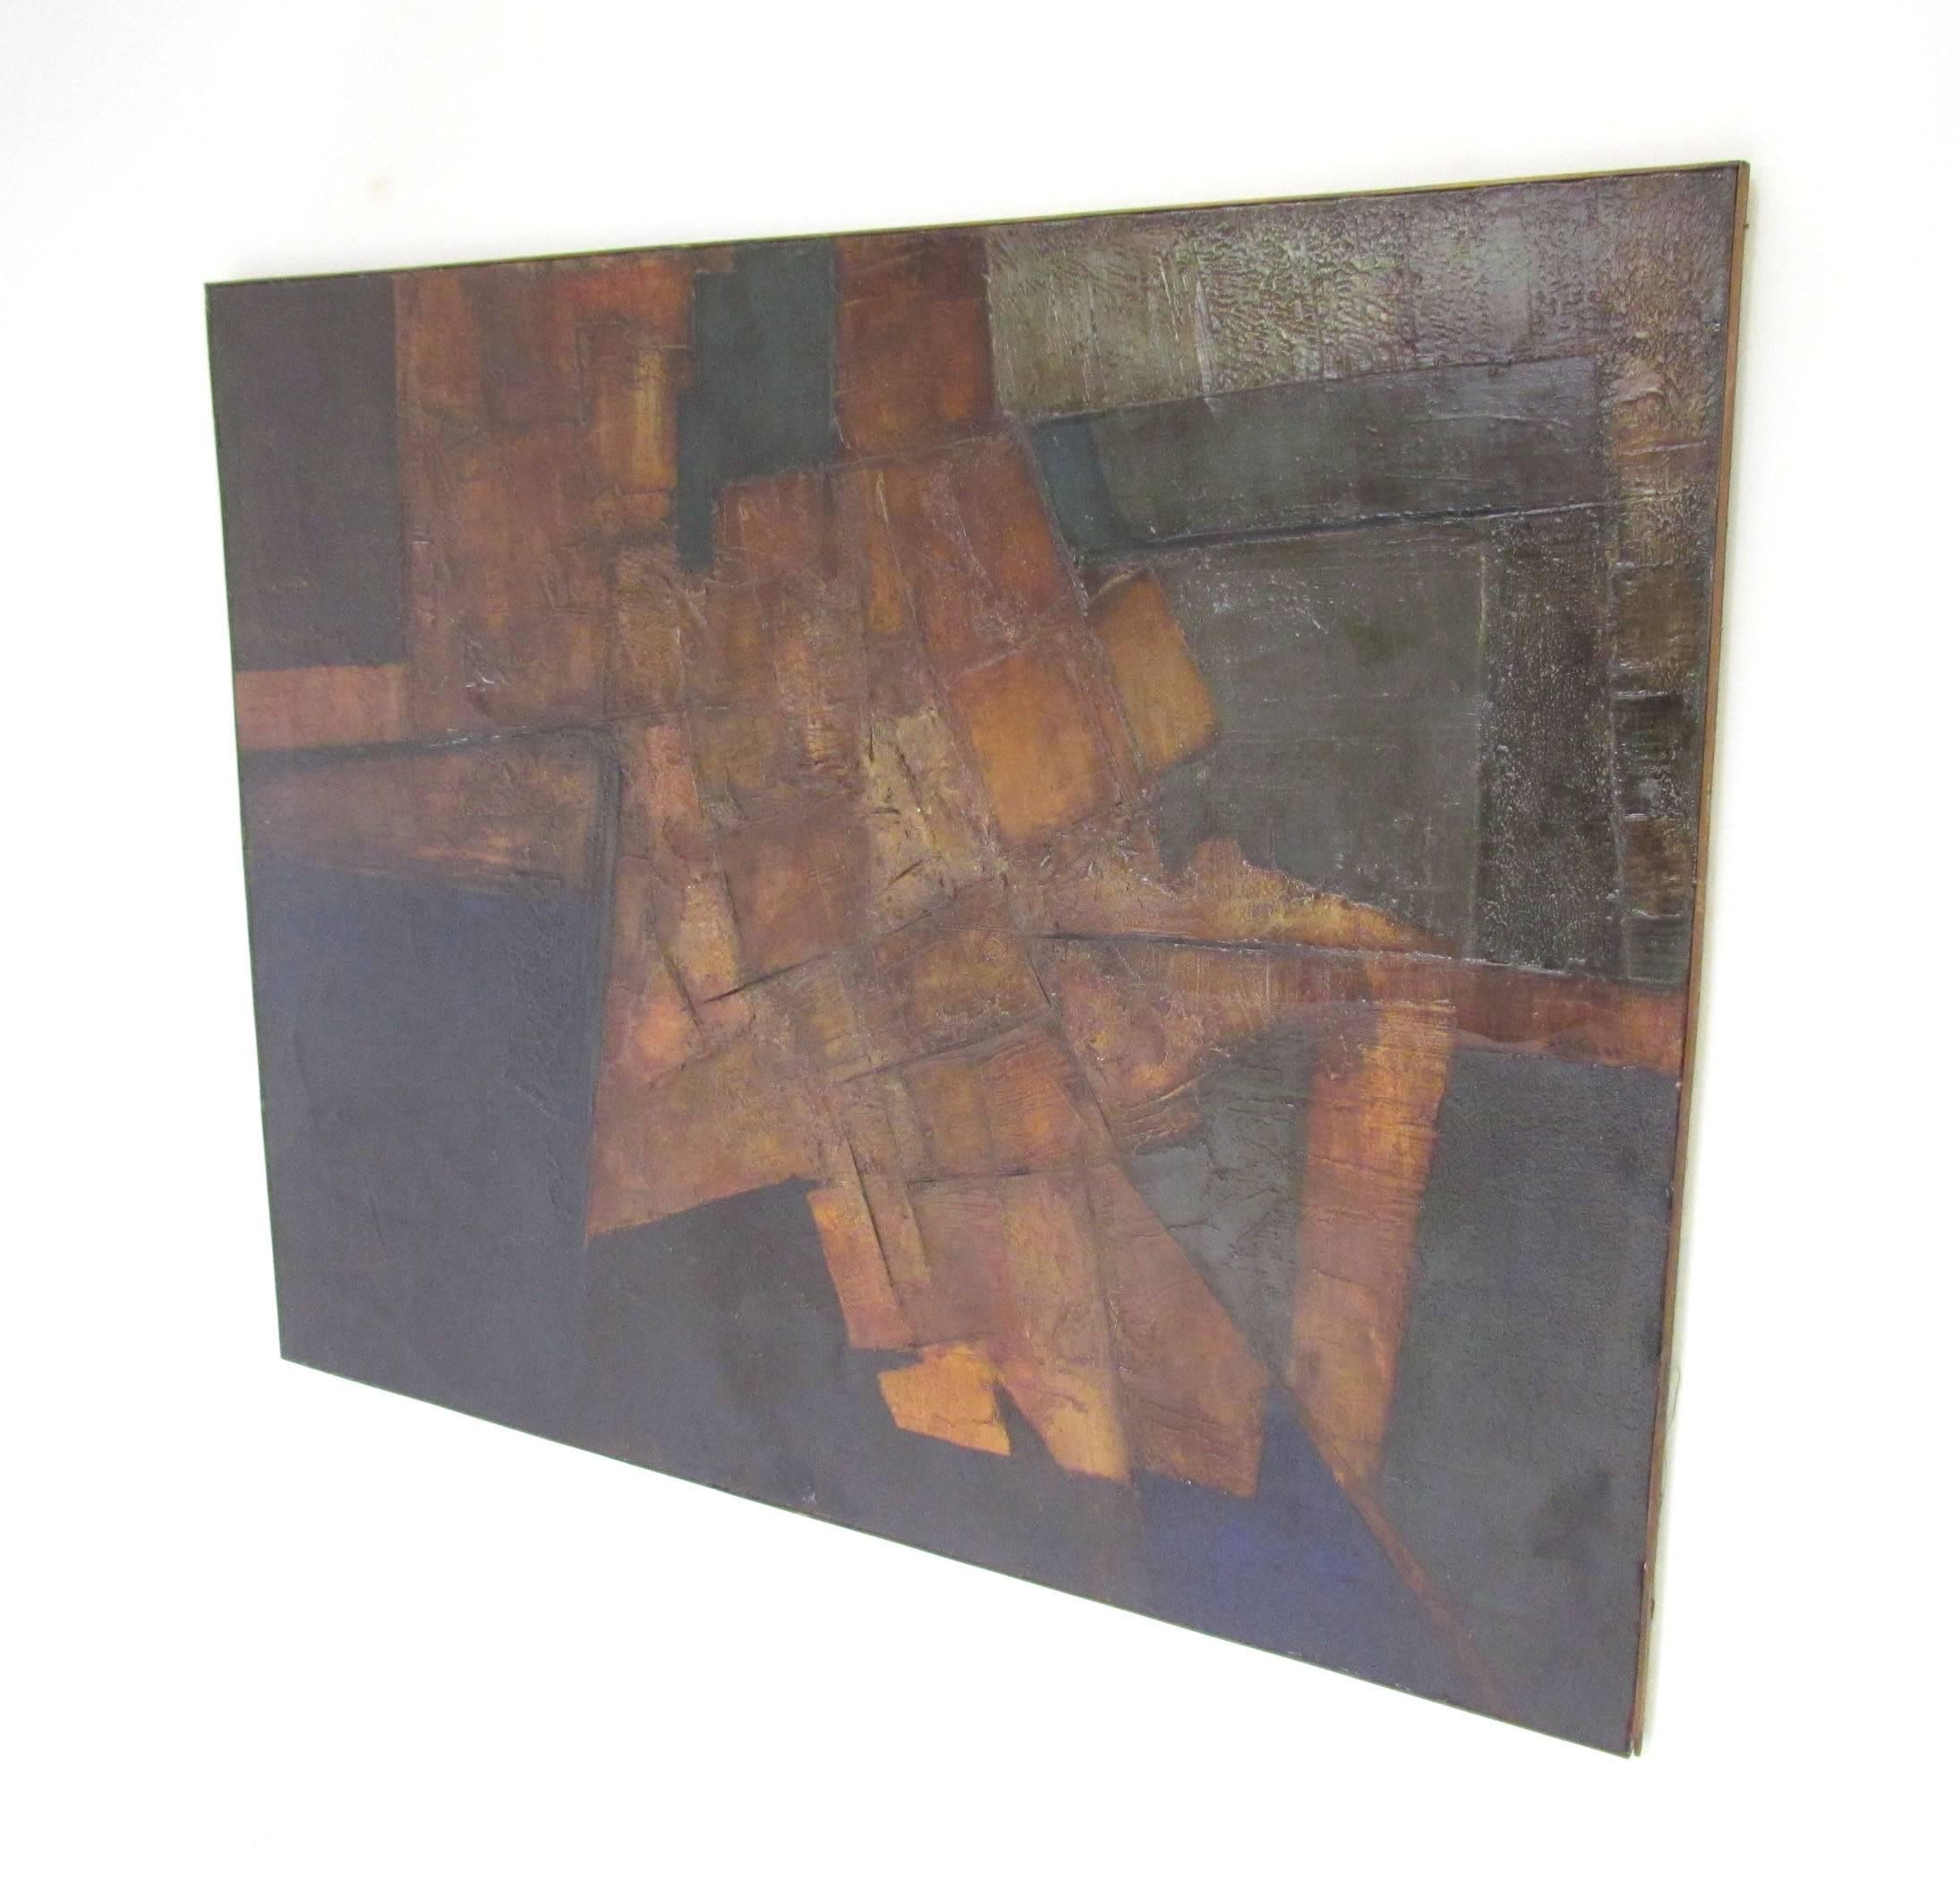 Rare large abstract painting titled "Yucatan" by noted Berkshire, MA artist John Stritch. Painted in France in 1963 at the beginning of his career.